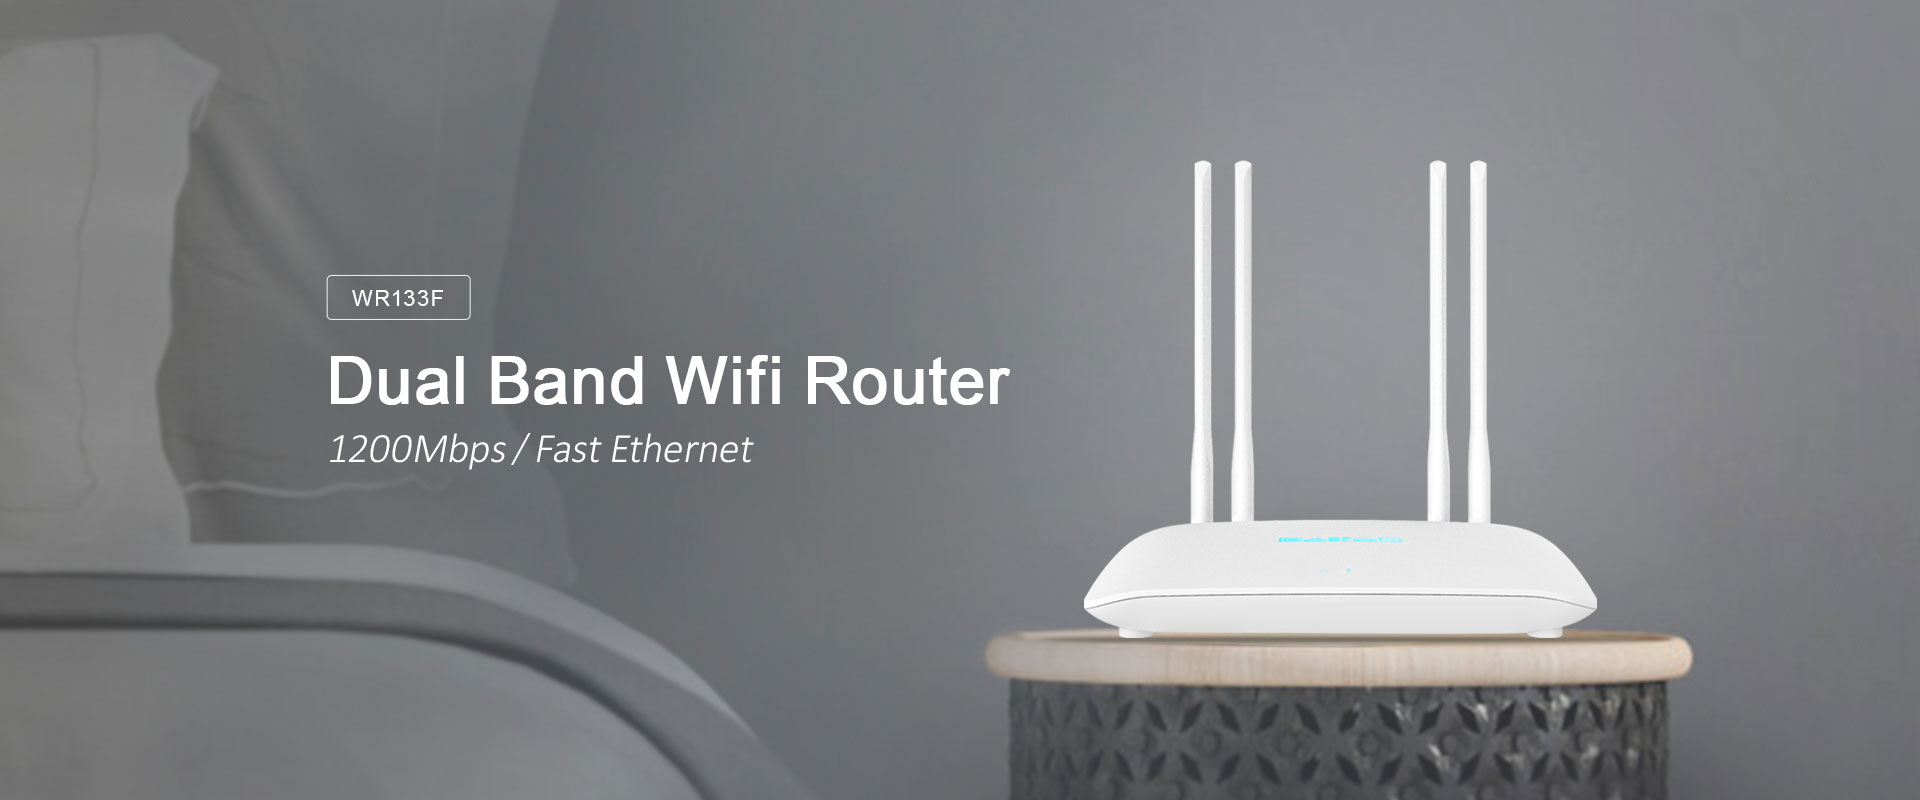 ac1200-fast-dual-band-wifi-router-wr133f